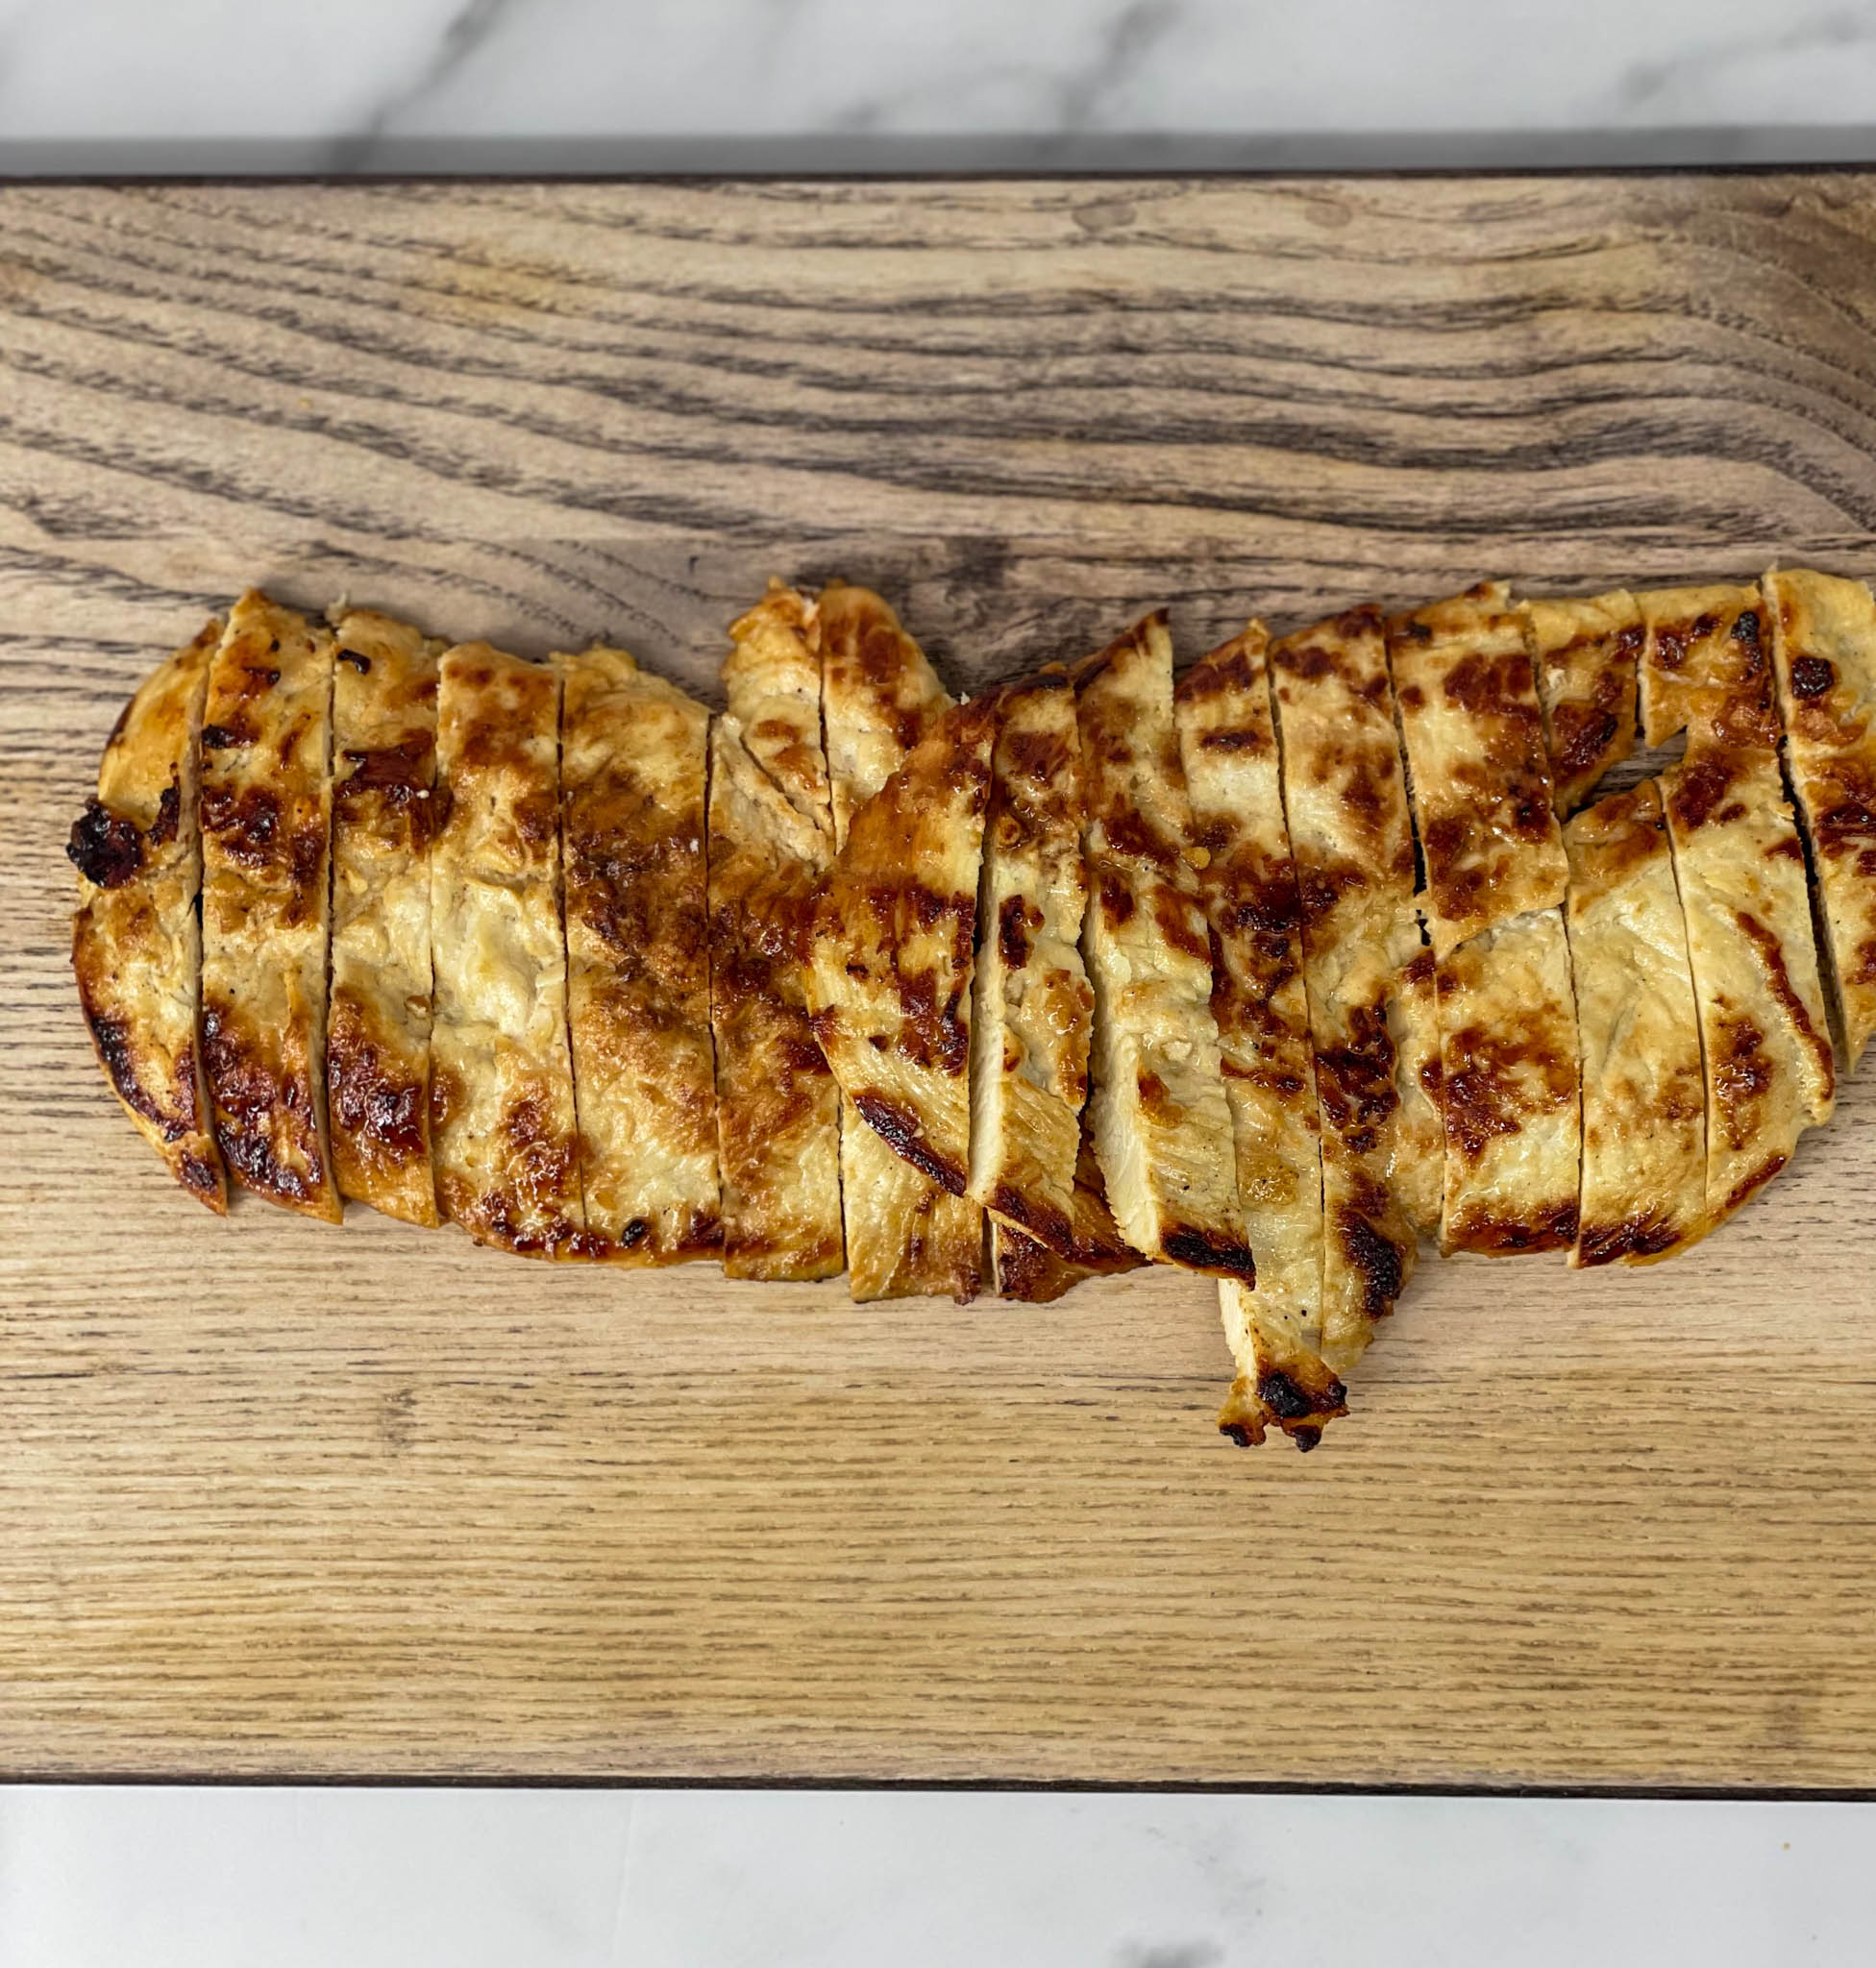 Grilled chicken on a wooden cutting board.